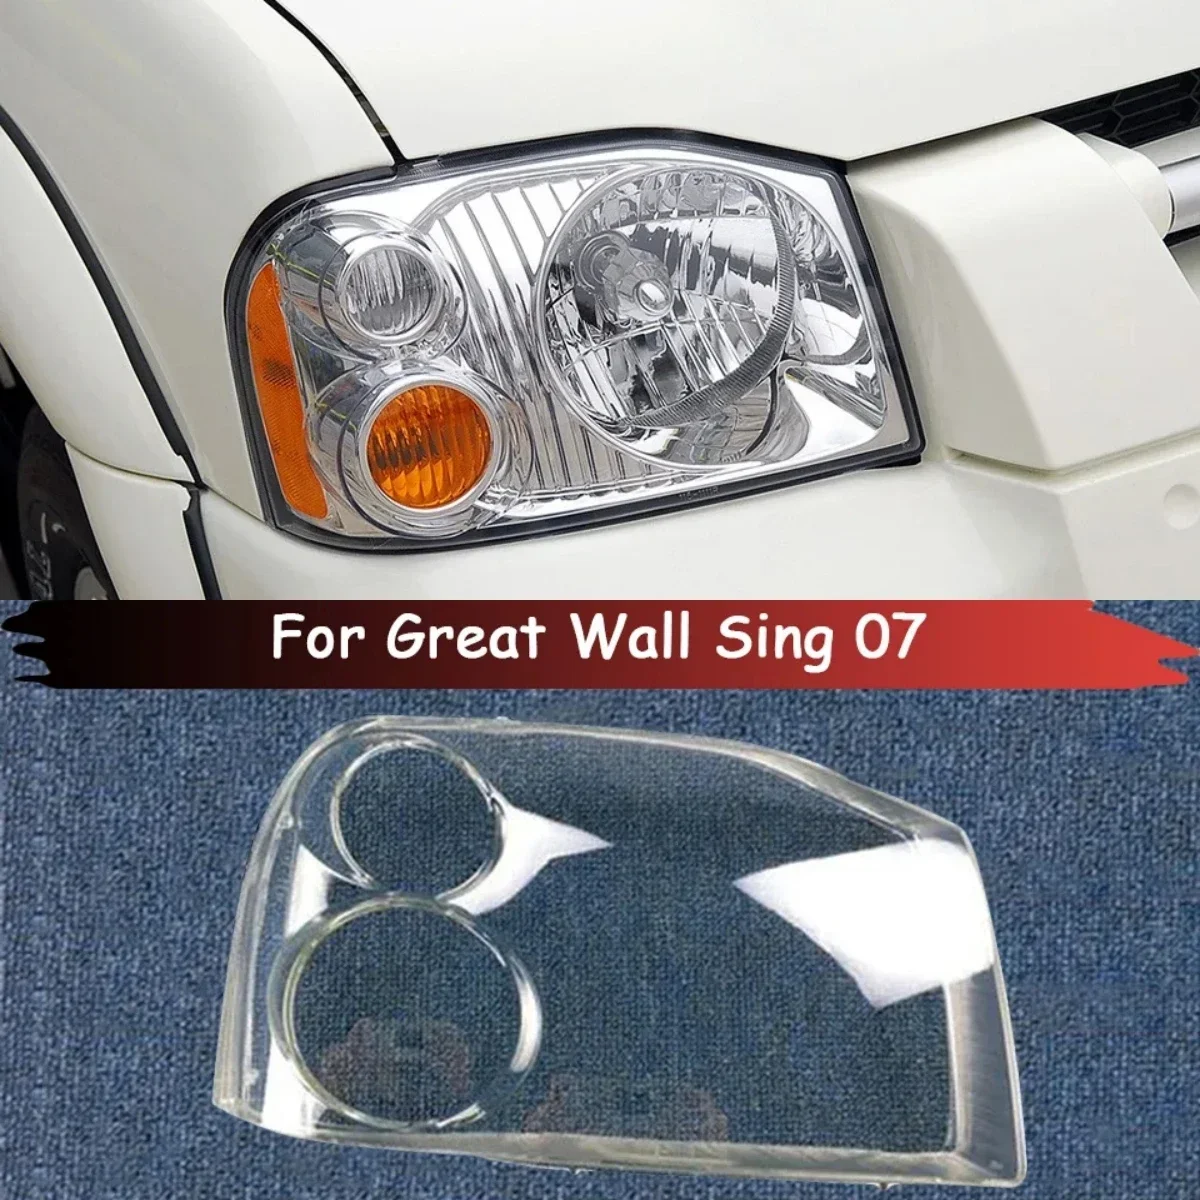 

For Great Wall Sing Car Lens Glass Light Housing Lamp Caps Headlamp Shell Transparent Lampshade Lampcover Headlight Cover 2007